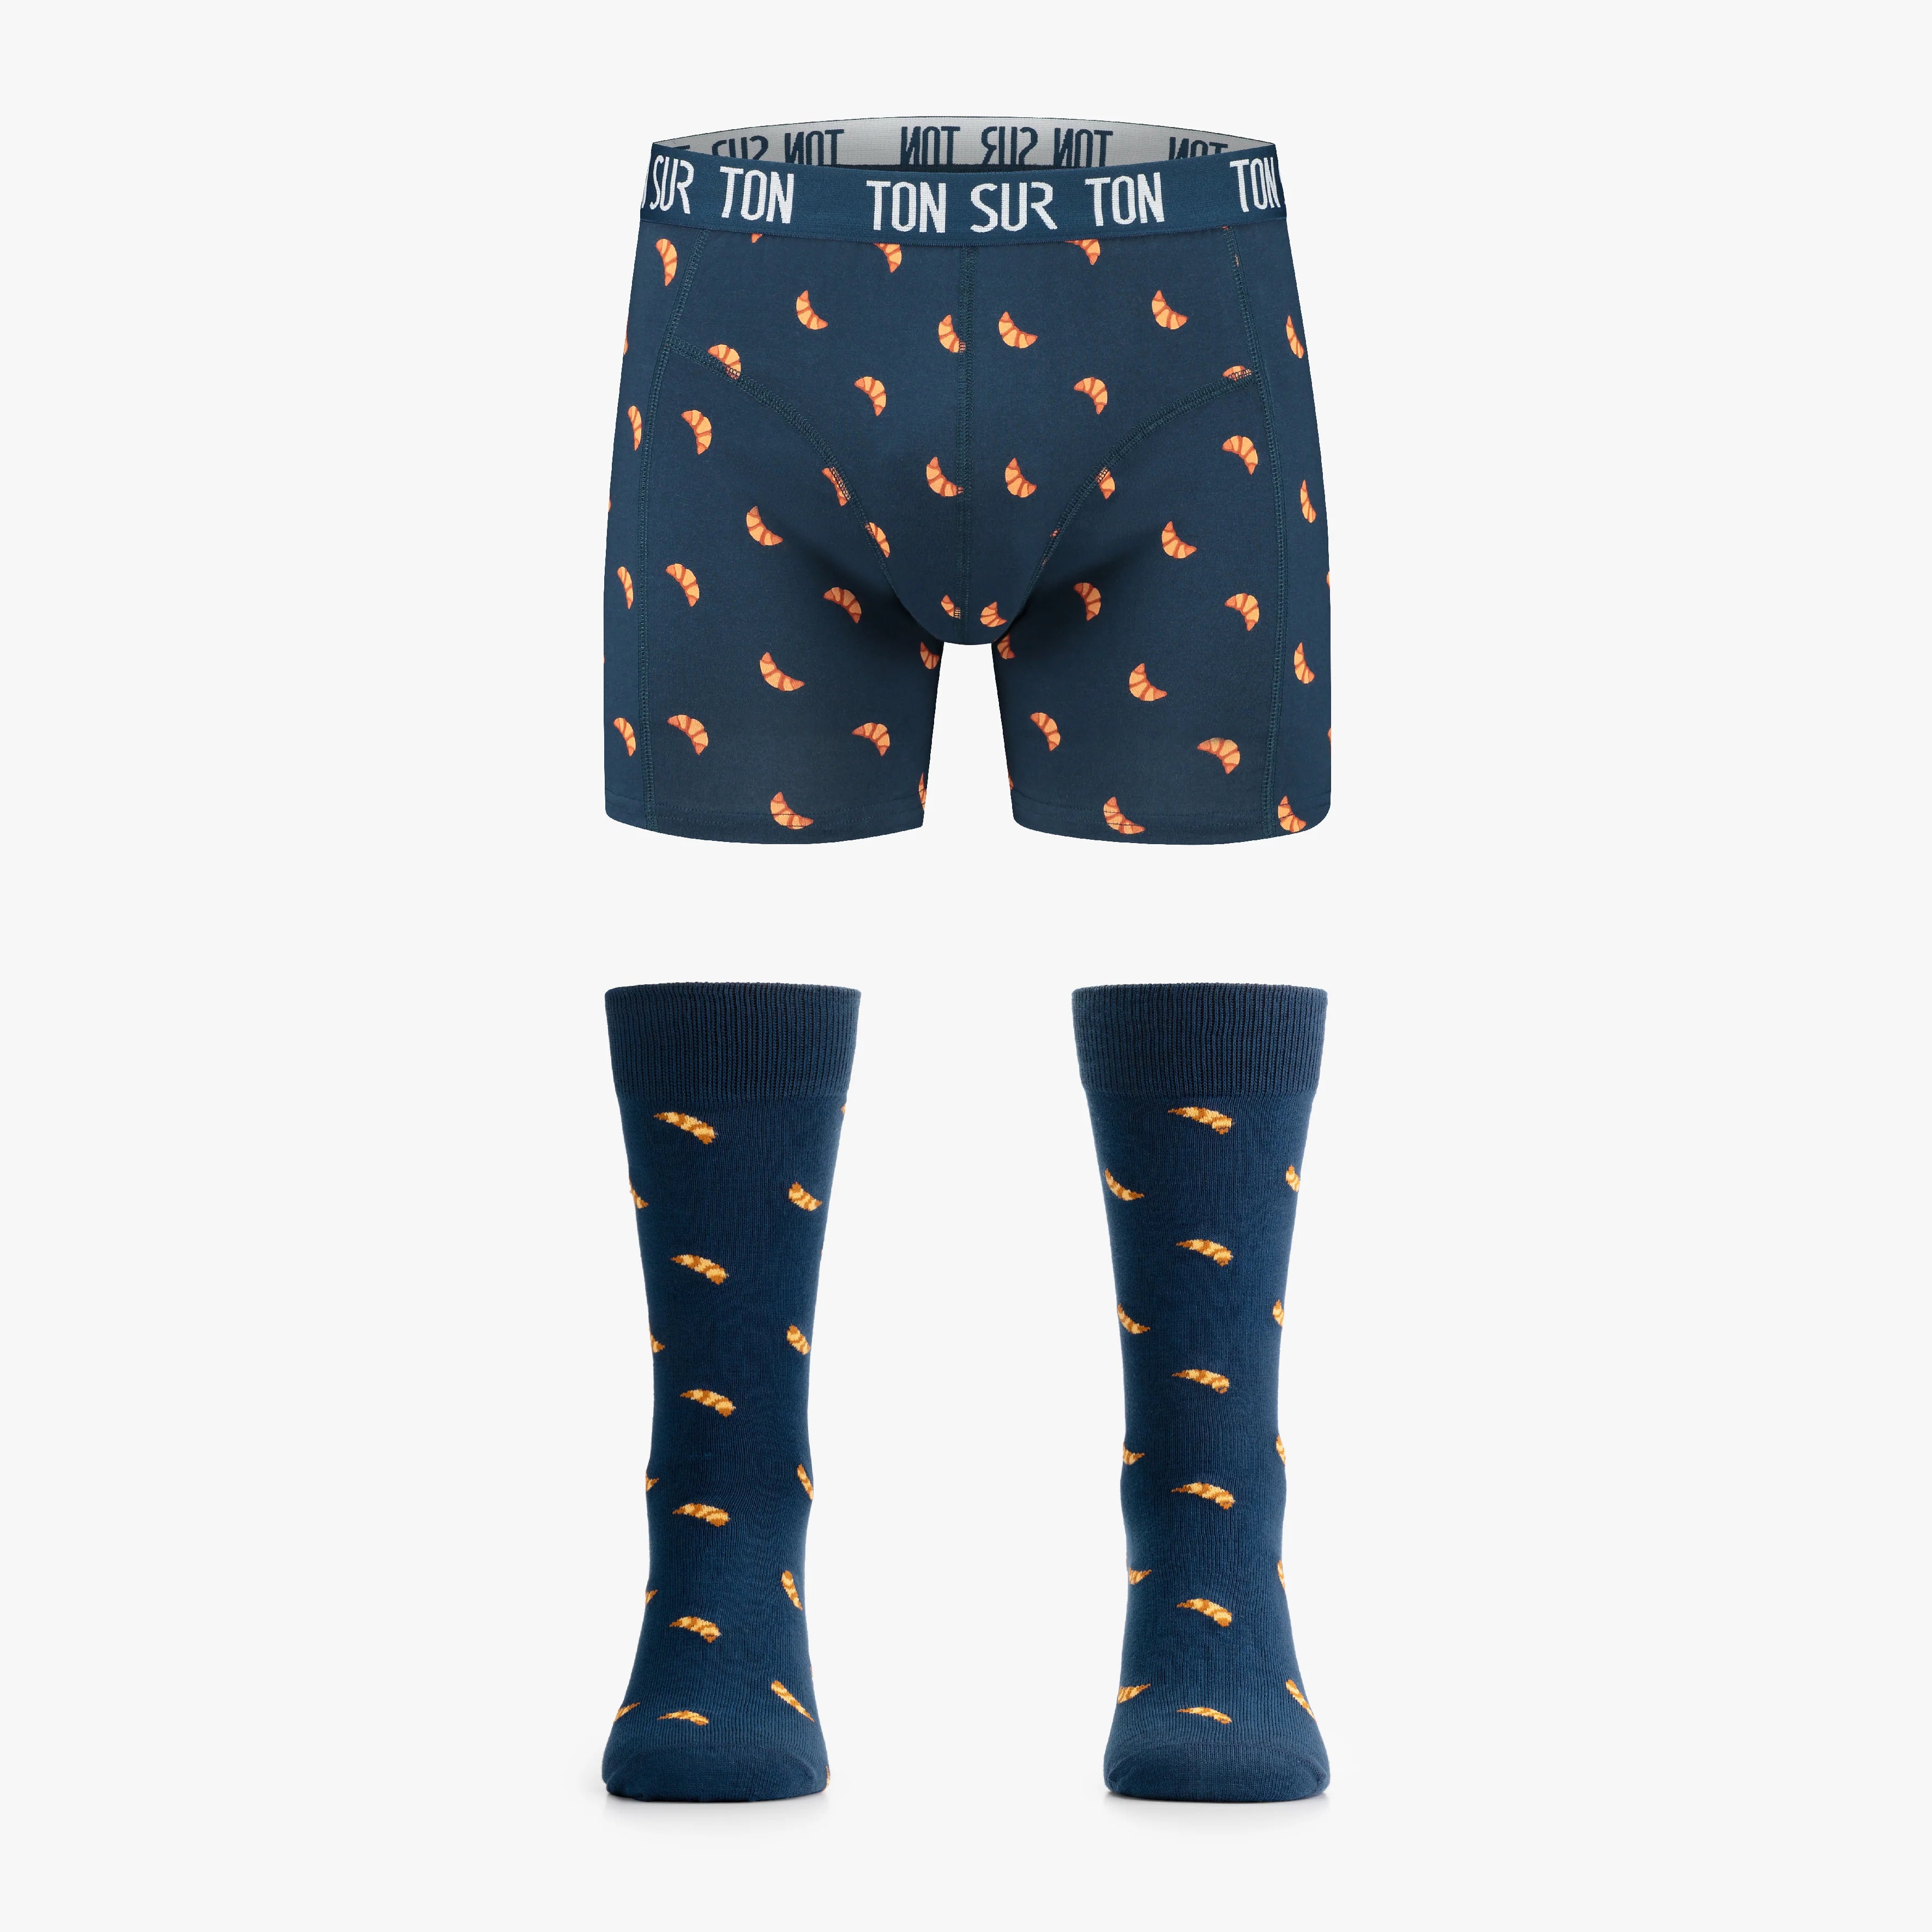 Viennoiserie - Organic Cotton Boxer Briefs and Socks